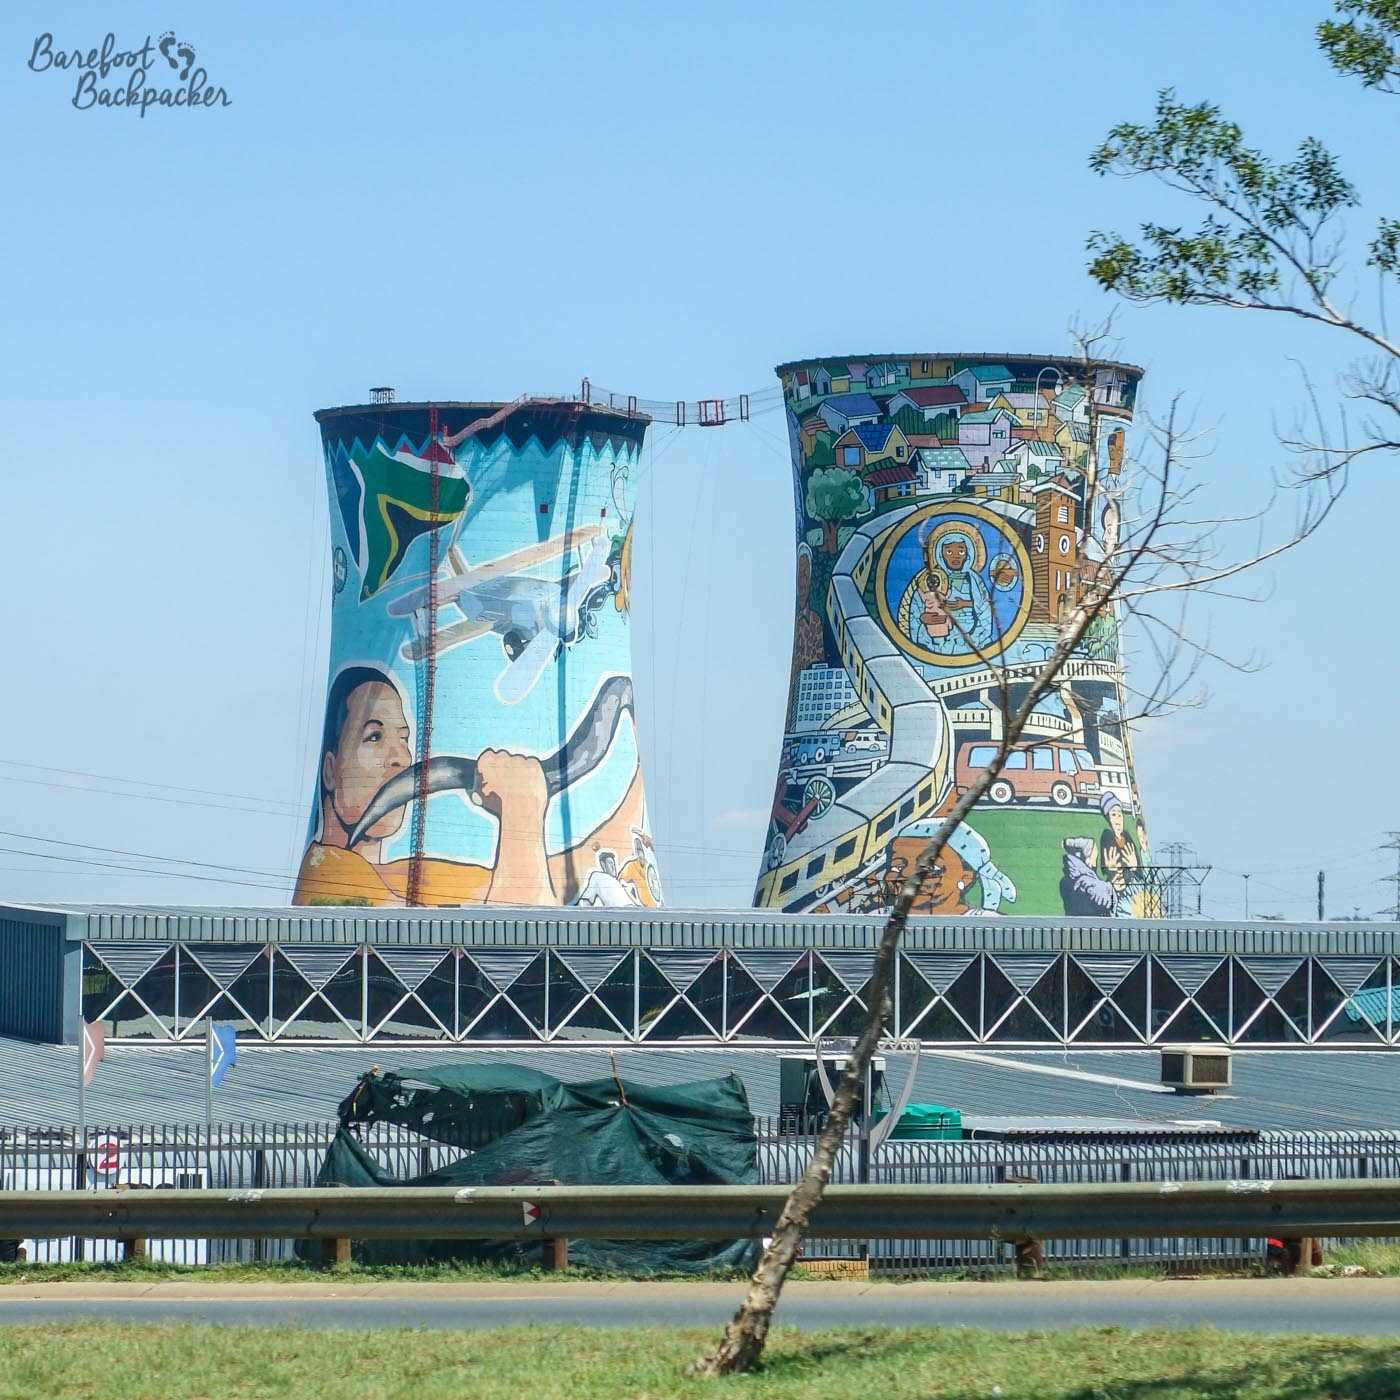 Orlando Power Station cooling towers, in Soweto, adorned with murals. The bungee platform is visible between them.